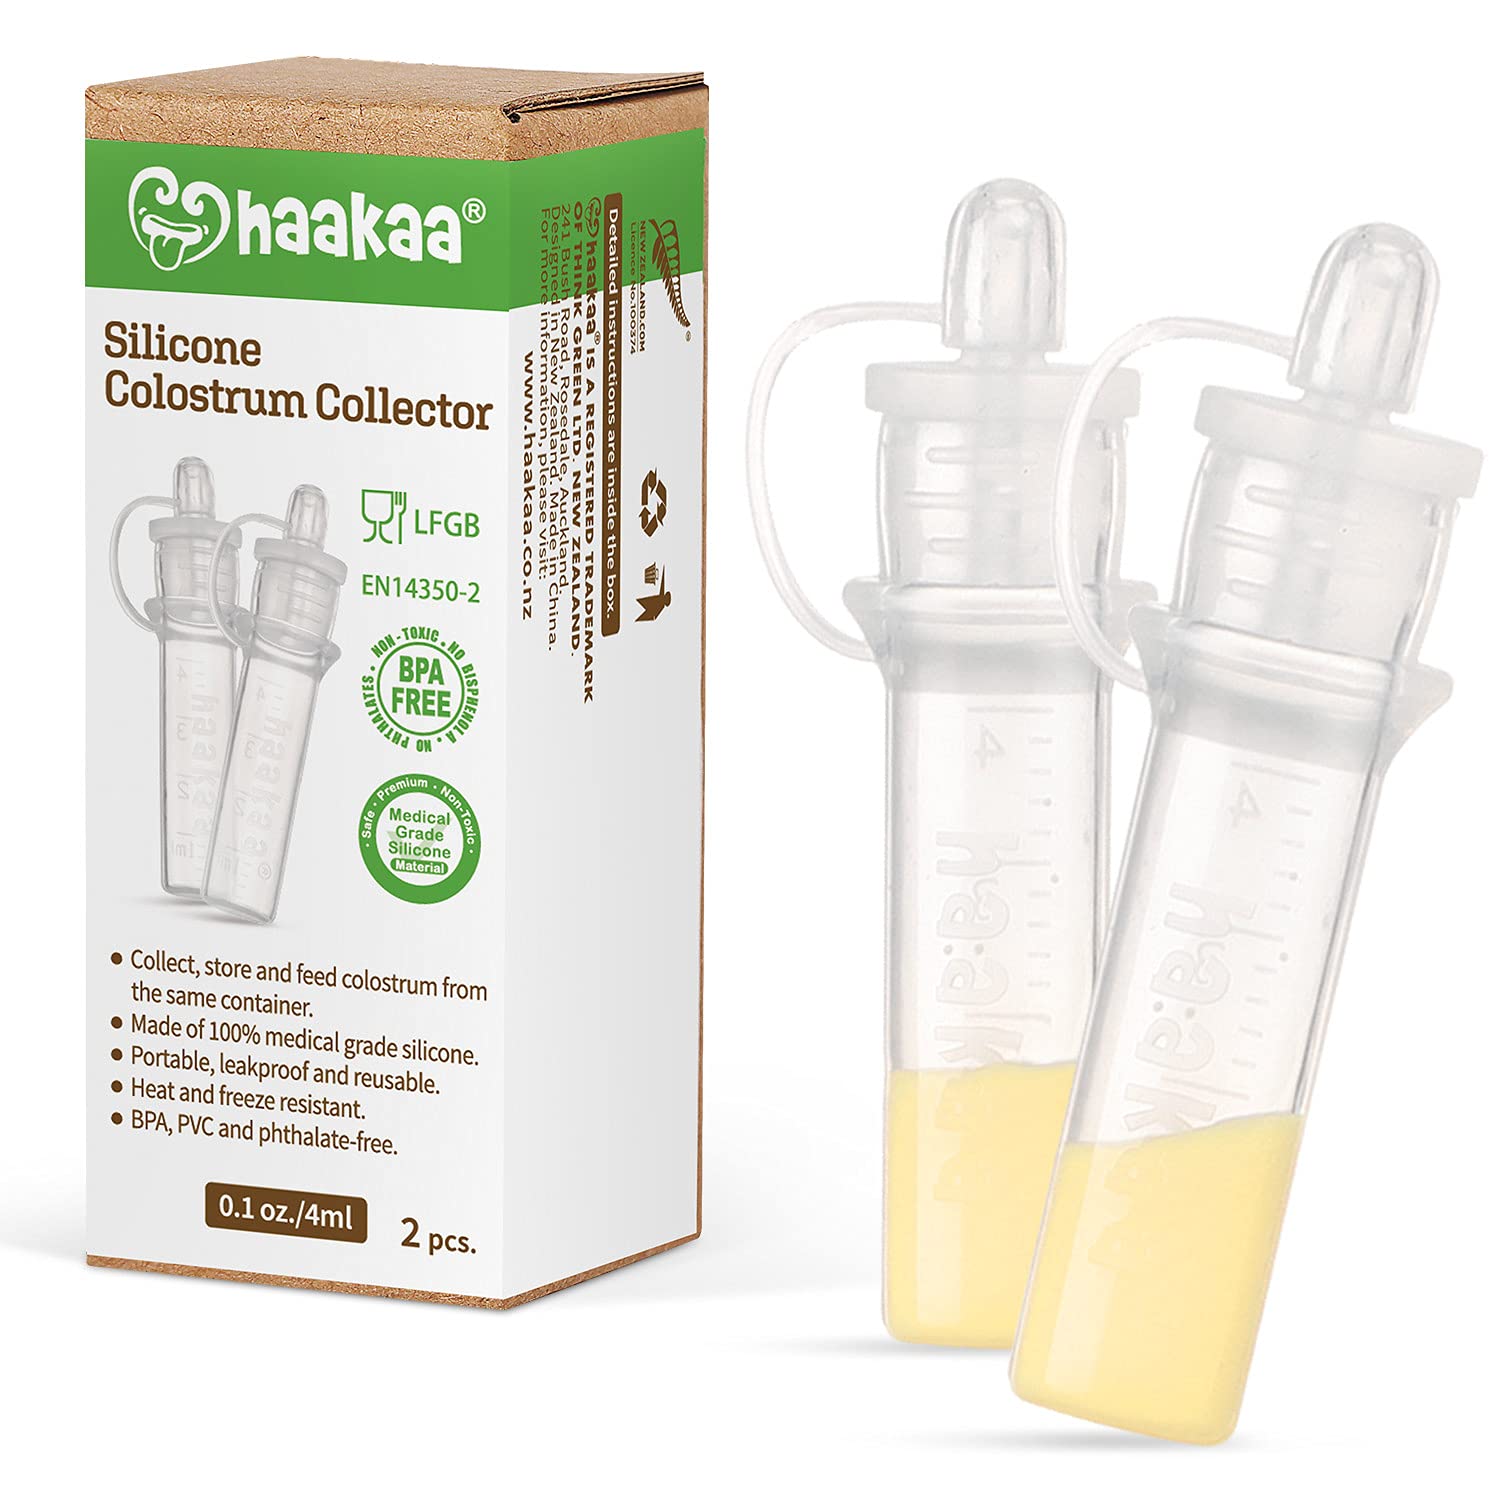 haakaa Colostrum Collector Syringes Set Colostrum Syringes with